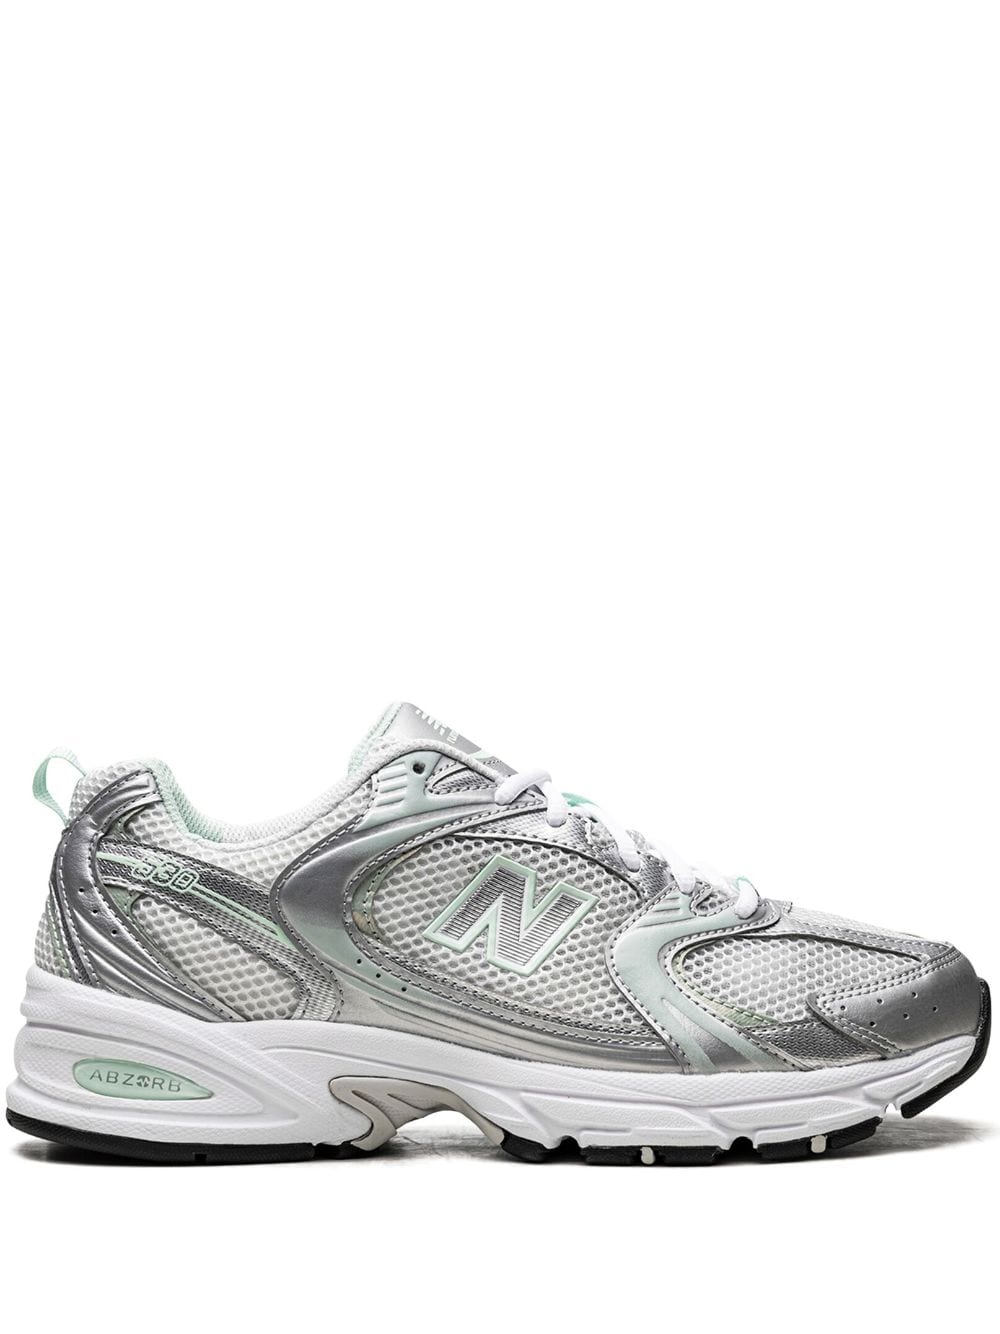 New Balance 530 Trainers In Metallic And Mint Green-Silver for Men